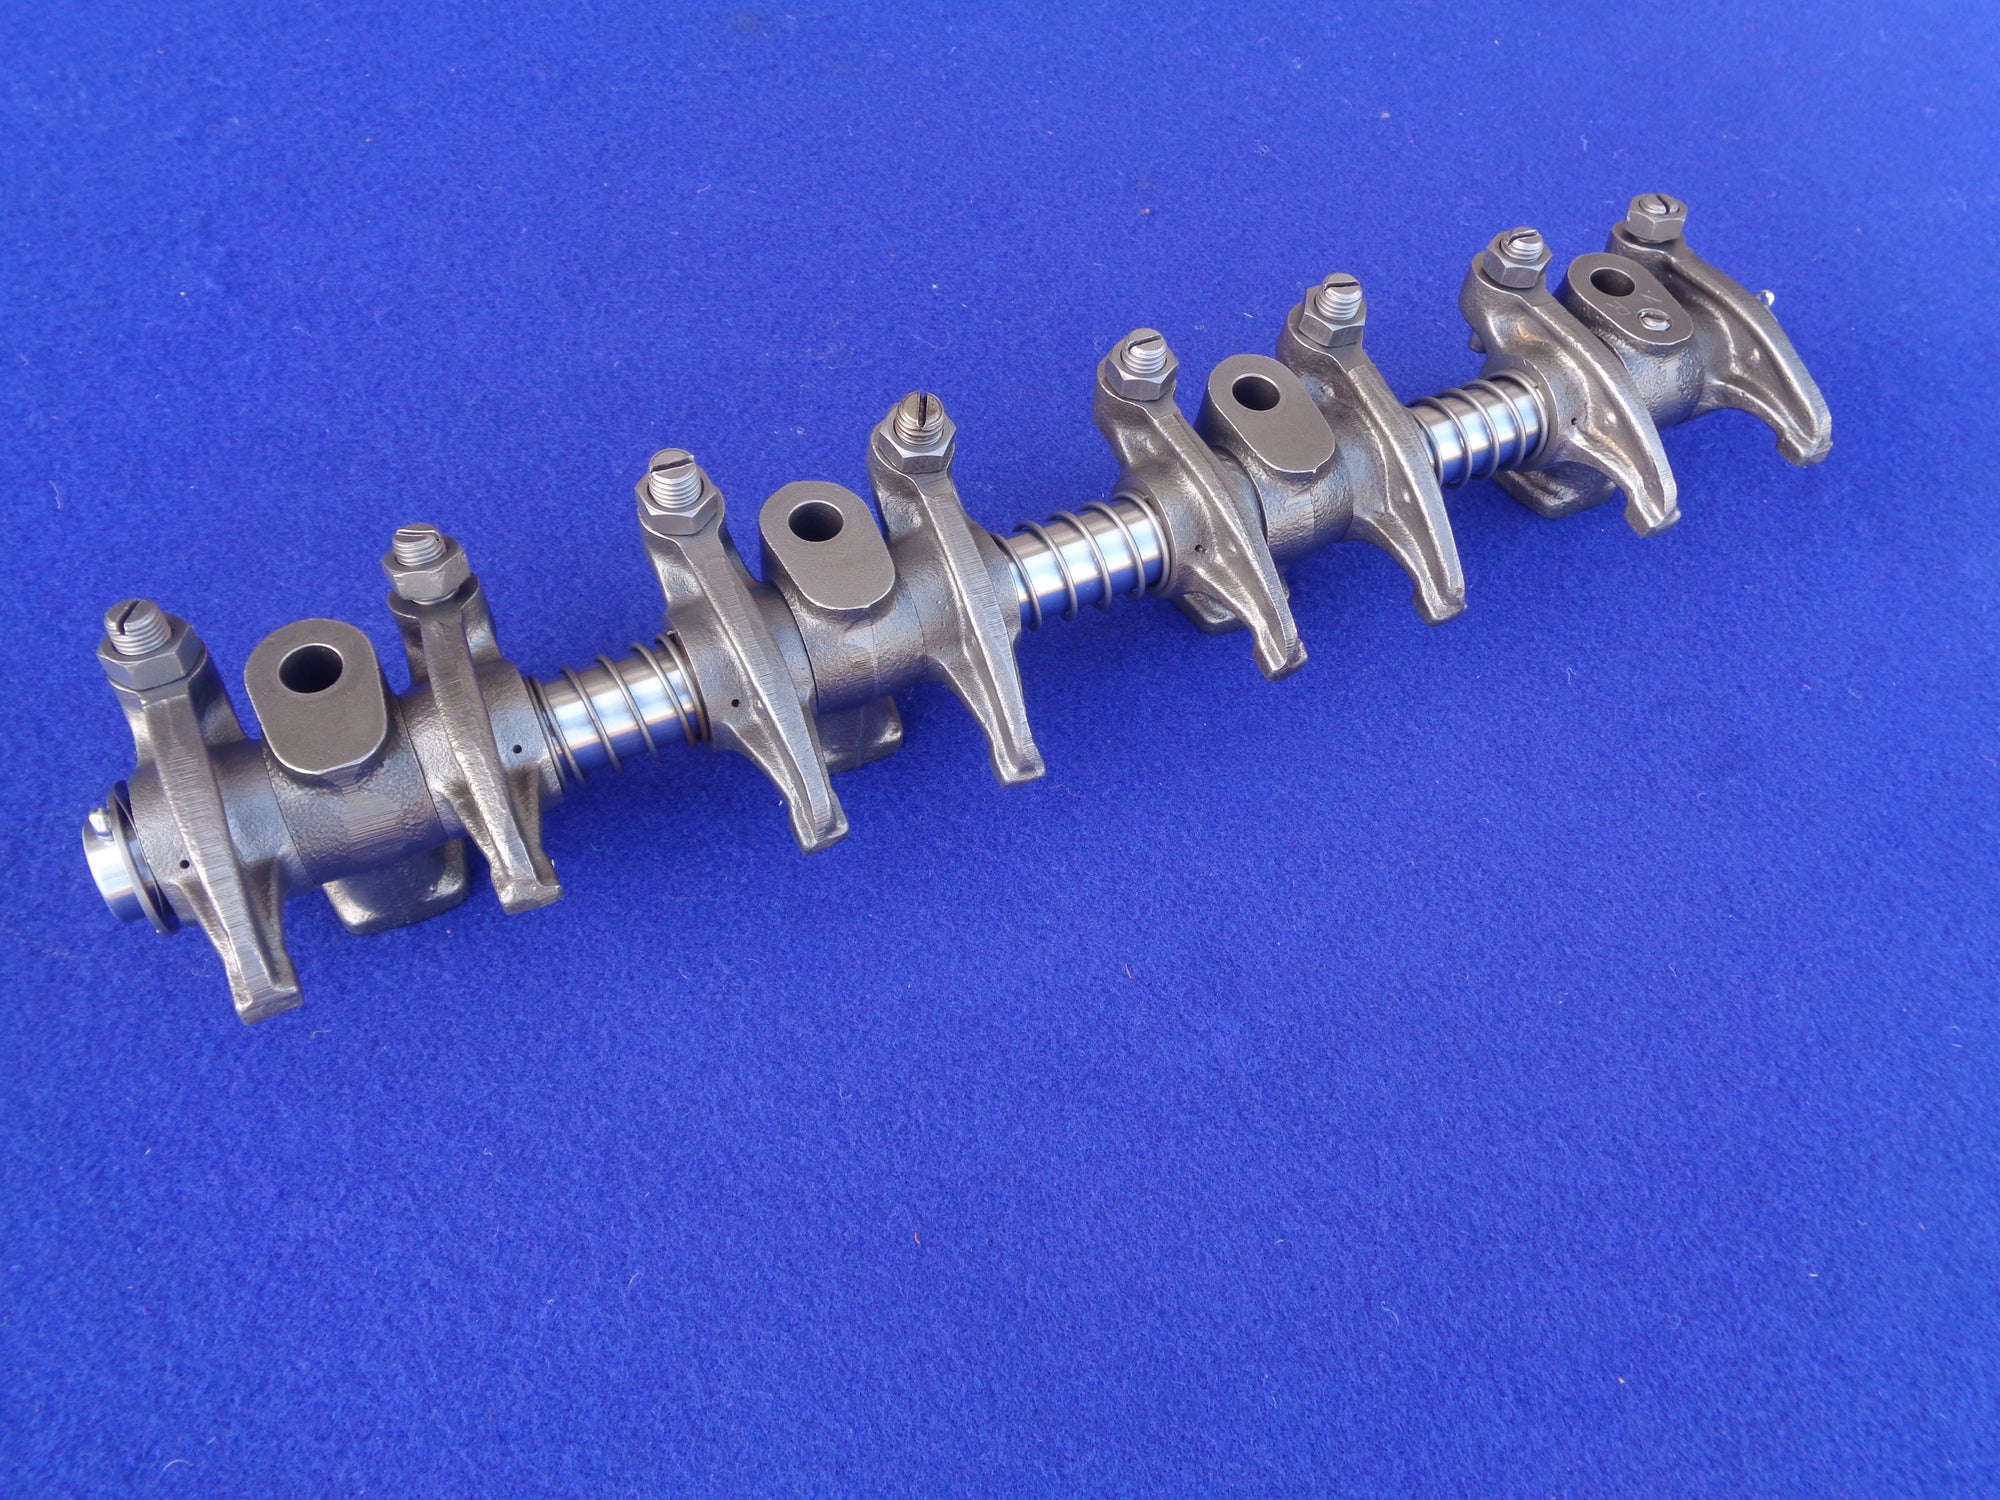 Datsun Roadster & Fairlady Early G15 and R16 Bushed Rocker-shaft Assembly